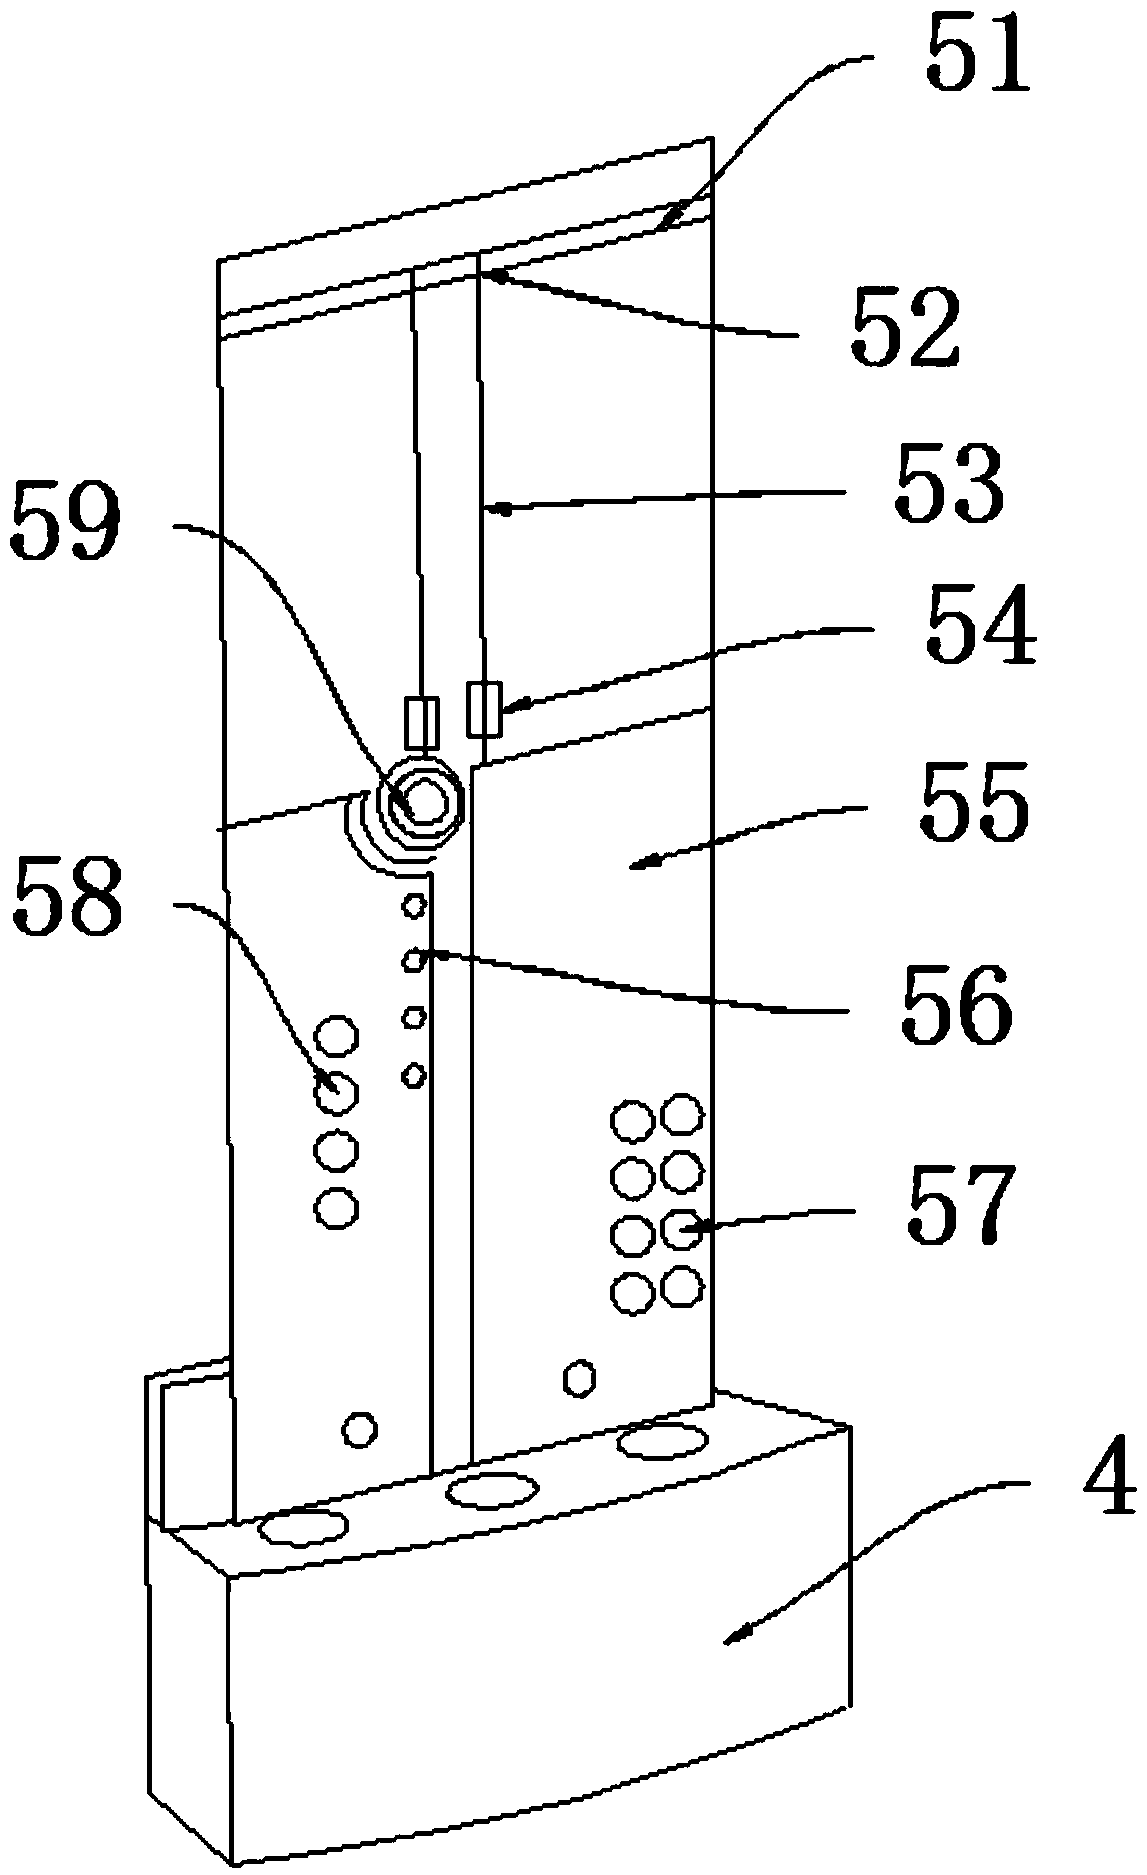 A Non-Array Aperture Antenna Beam Tilt Electronic Antenna and Its Realization Method